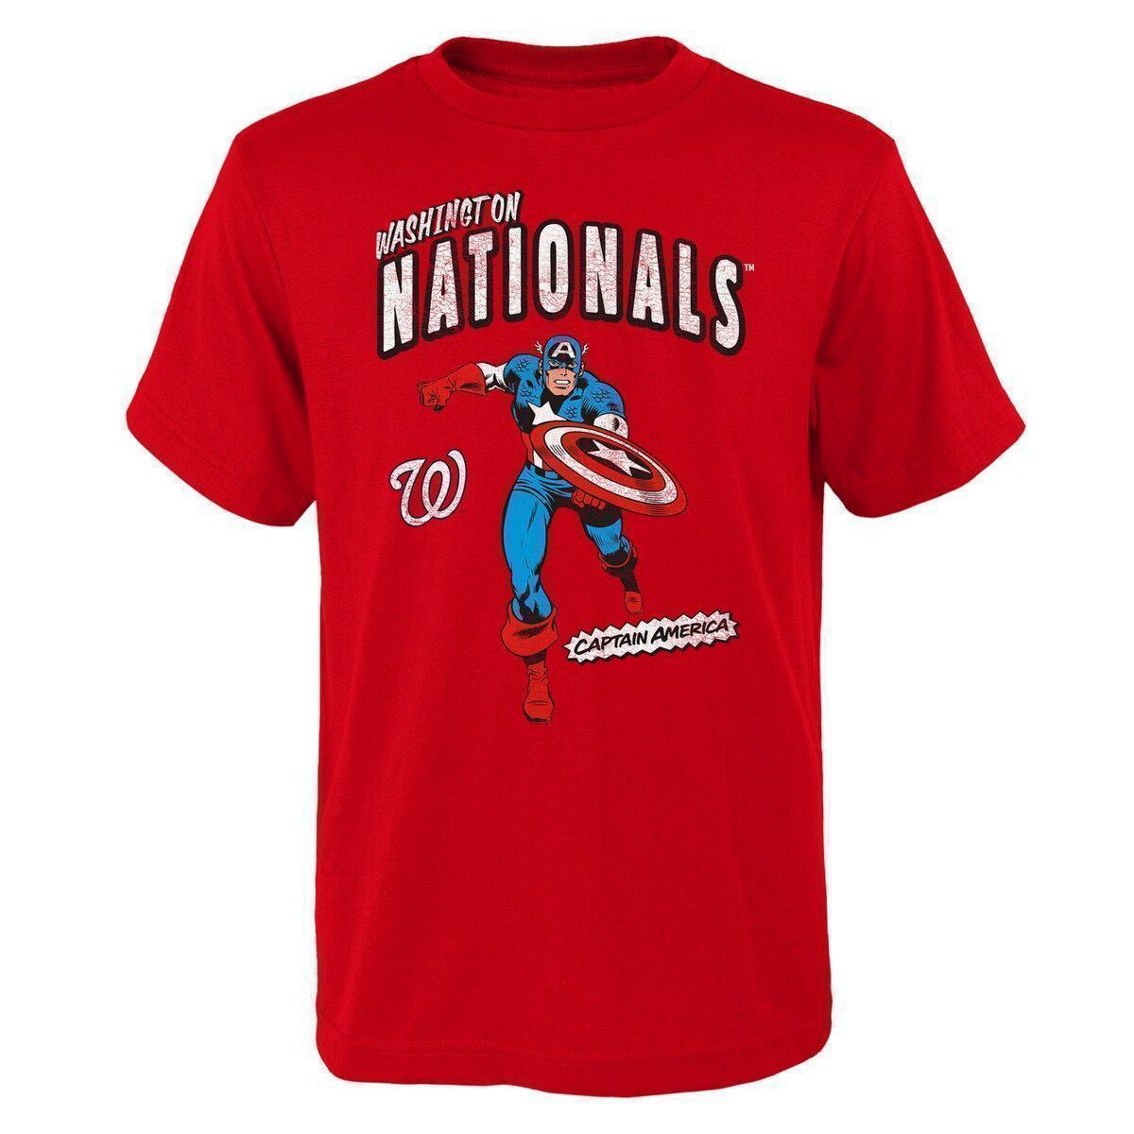 Outerstuff Youth Red Washington Nationals Team Captain America Marvel T-Shirt - Image 2 of 2